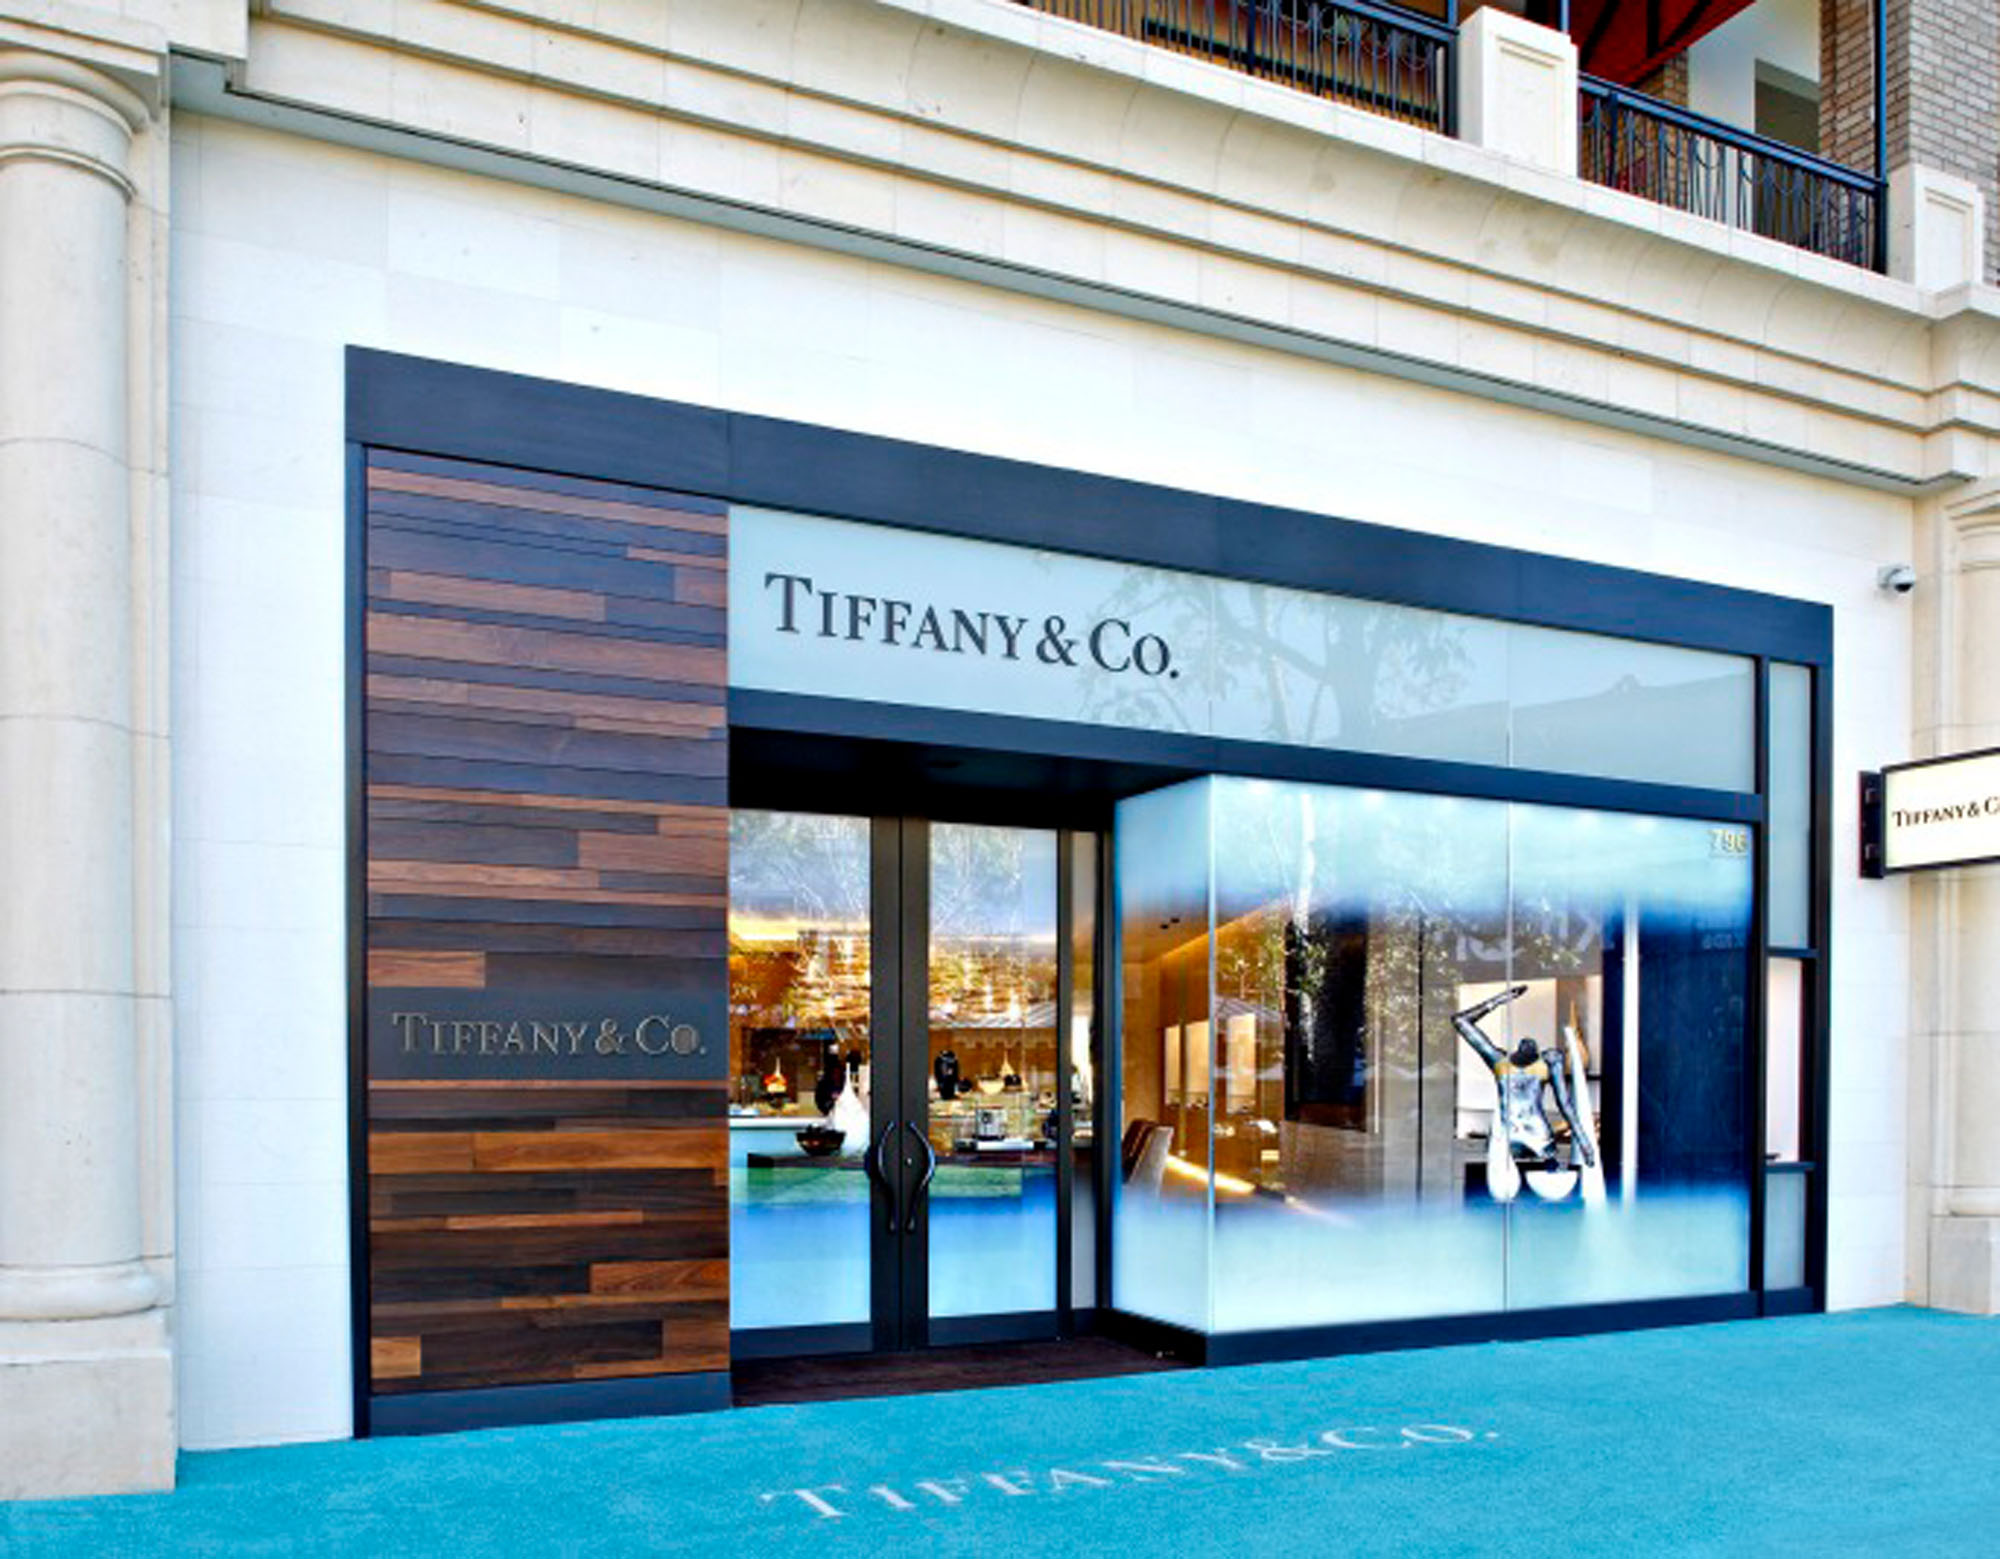 The Beginning of a Brand: Tiffany & Co.